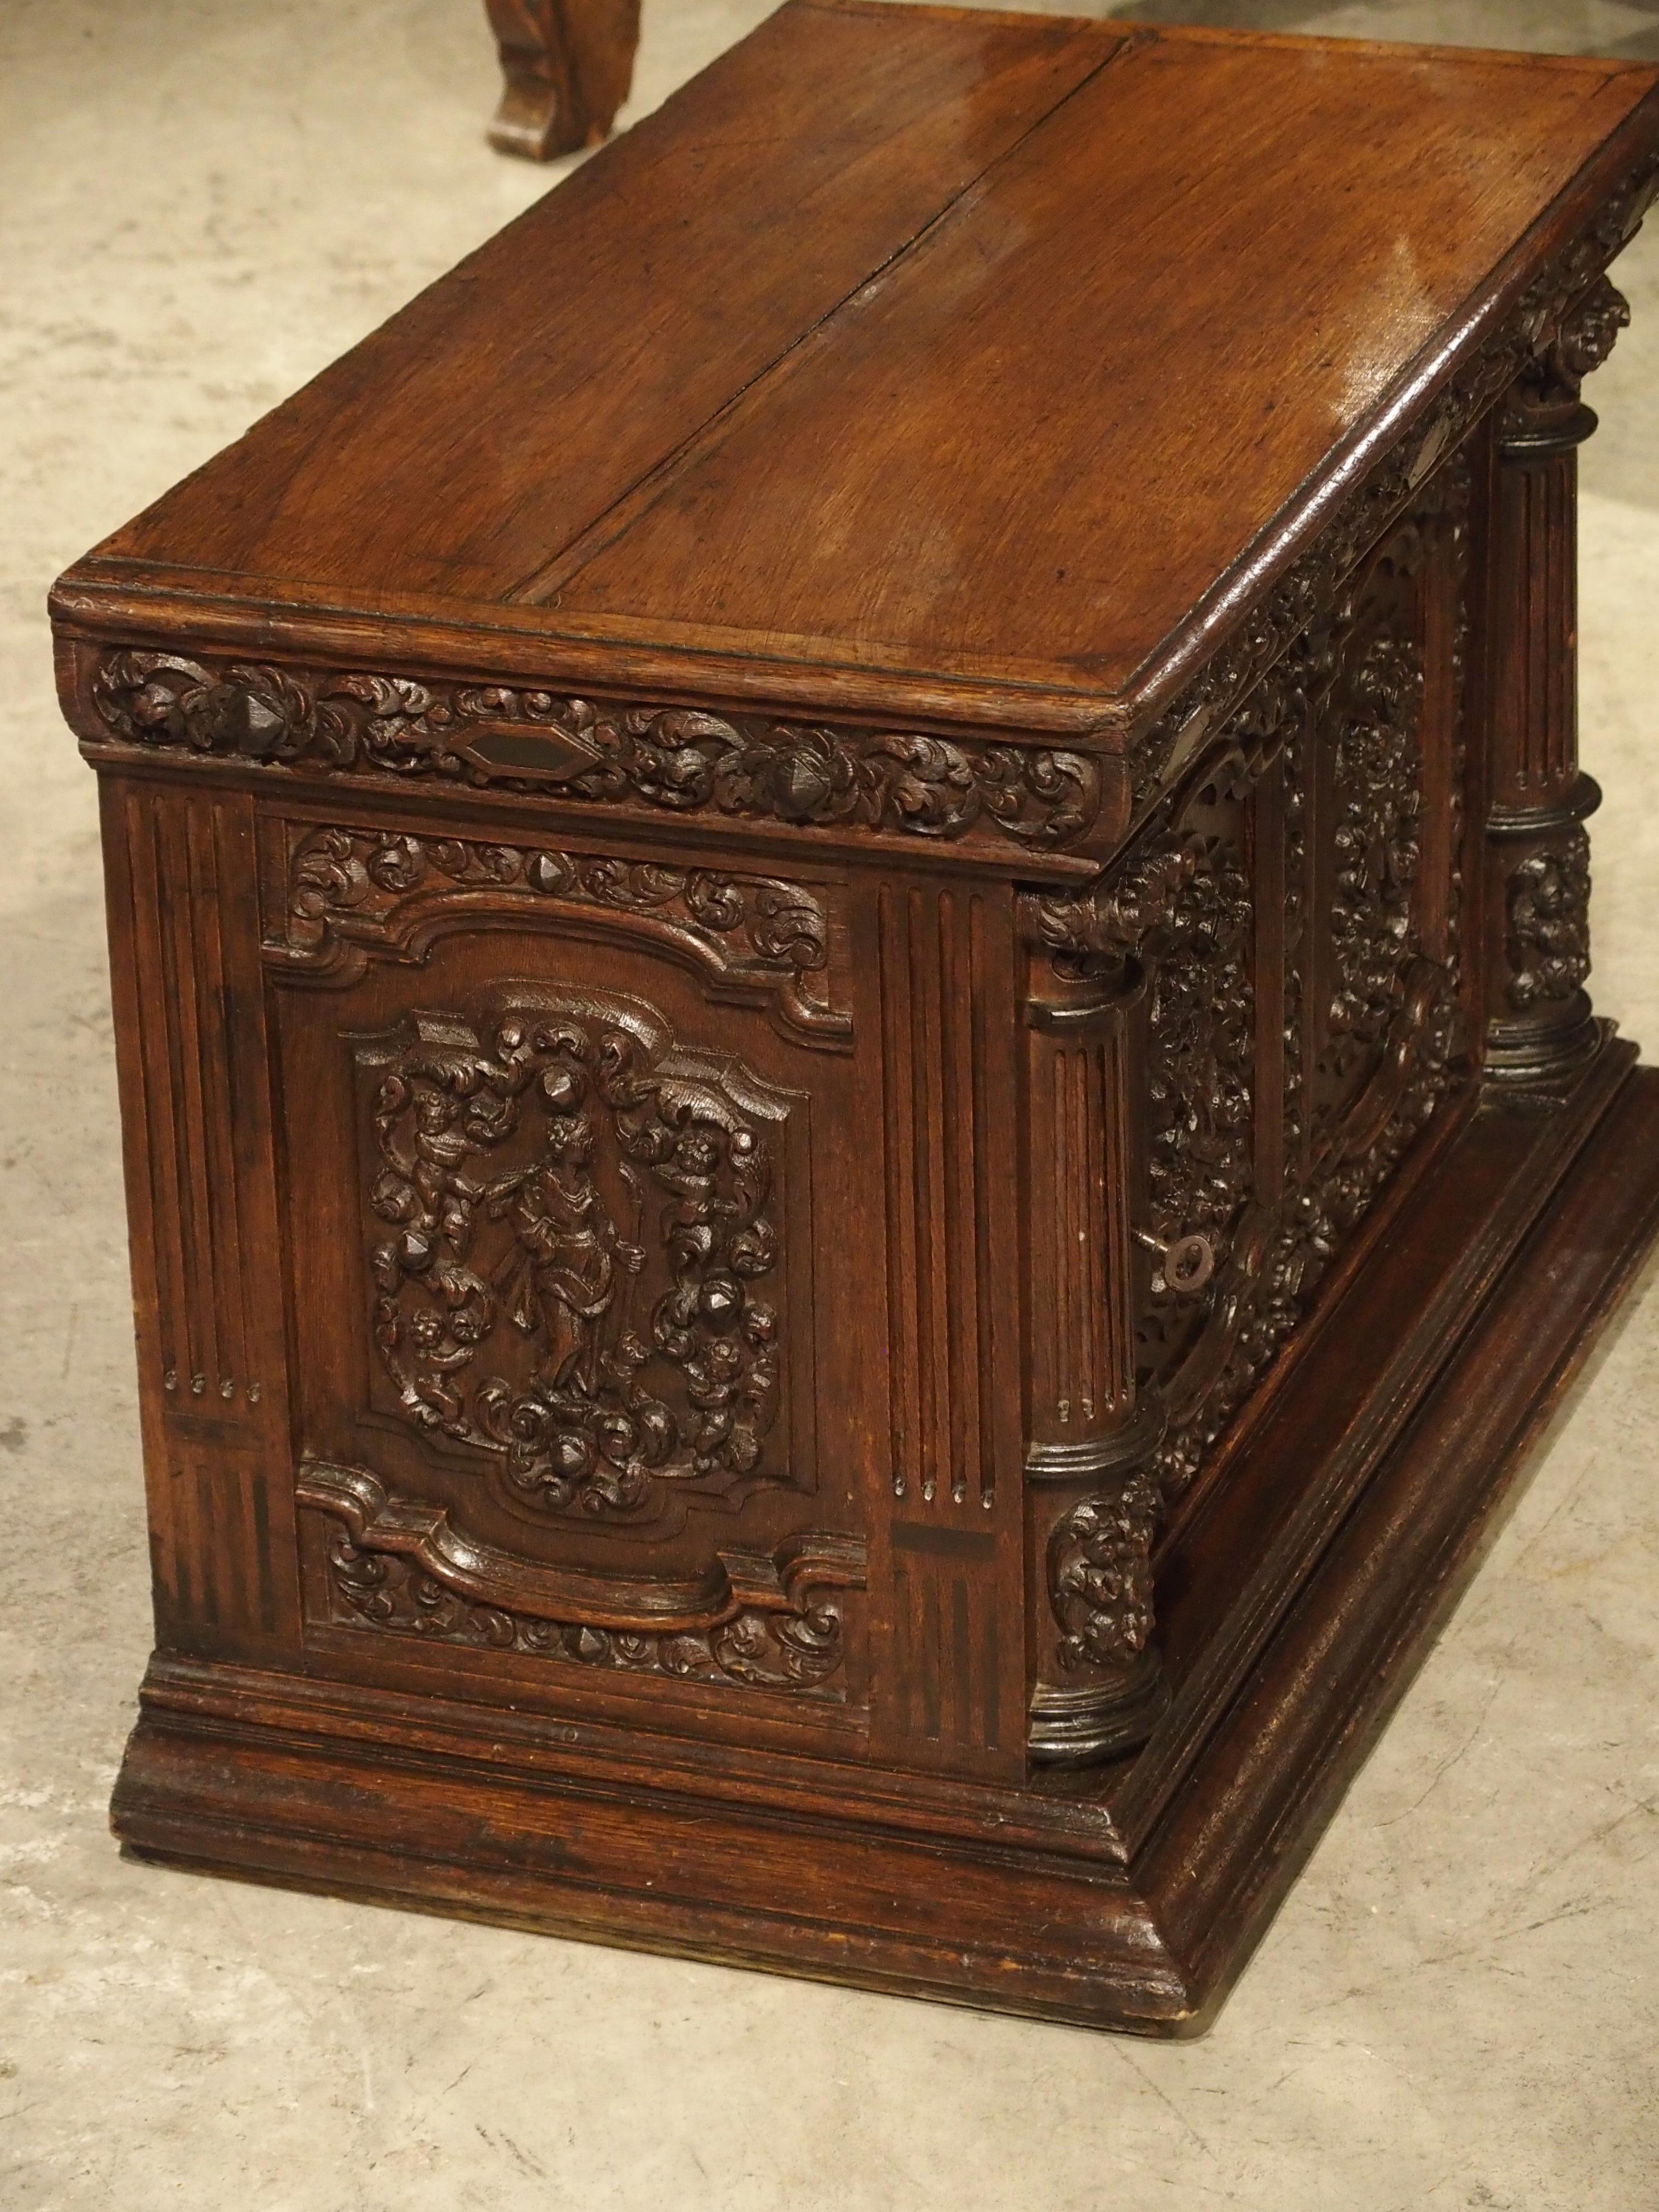 This antique oak rectangular cabinet has an abundance of finely carved motifs. At only 19 1/2 inches high, it is a good size for resting on a tabletop or pedestal. There is a plain top over carved panels on both sides and the front. The interior of